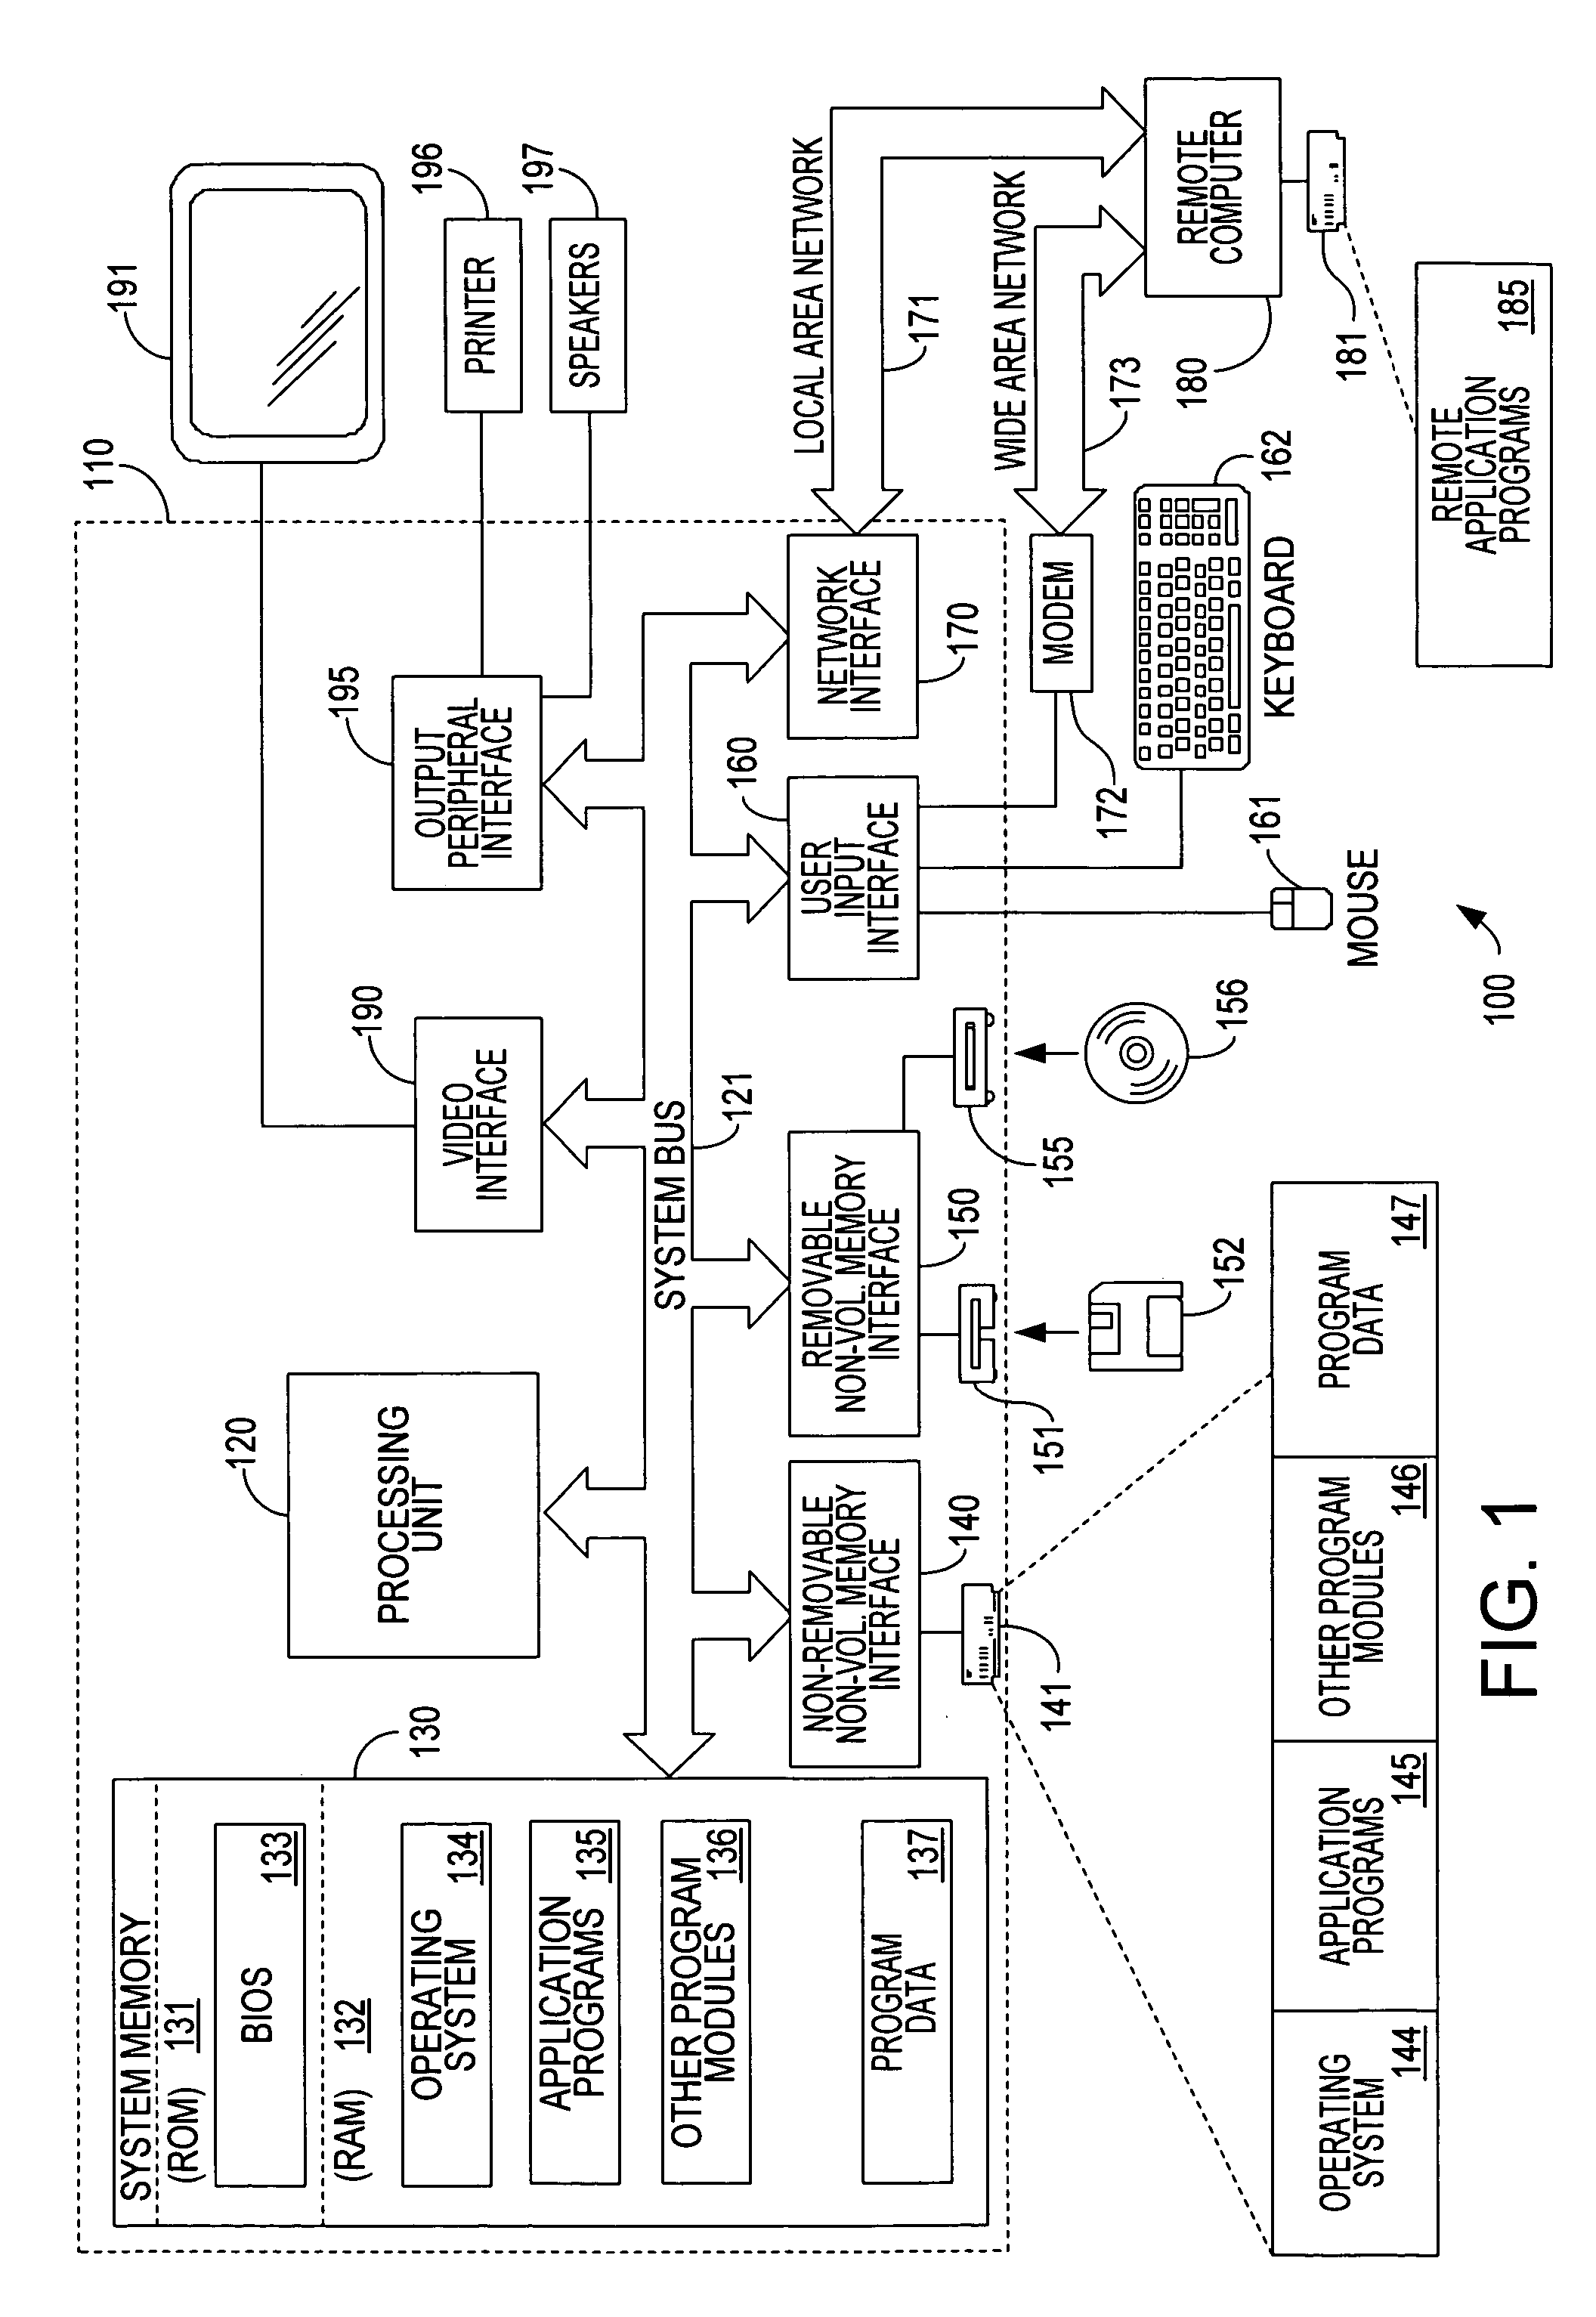 Method for providing user authentication/authorization and distributed firewall utilizing same